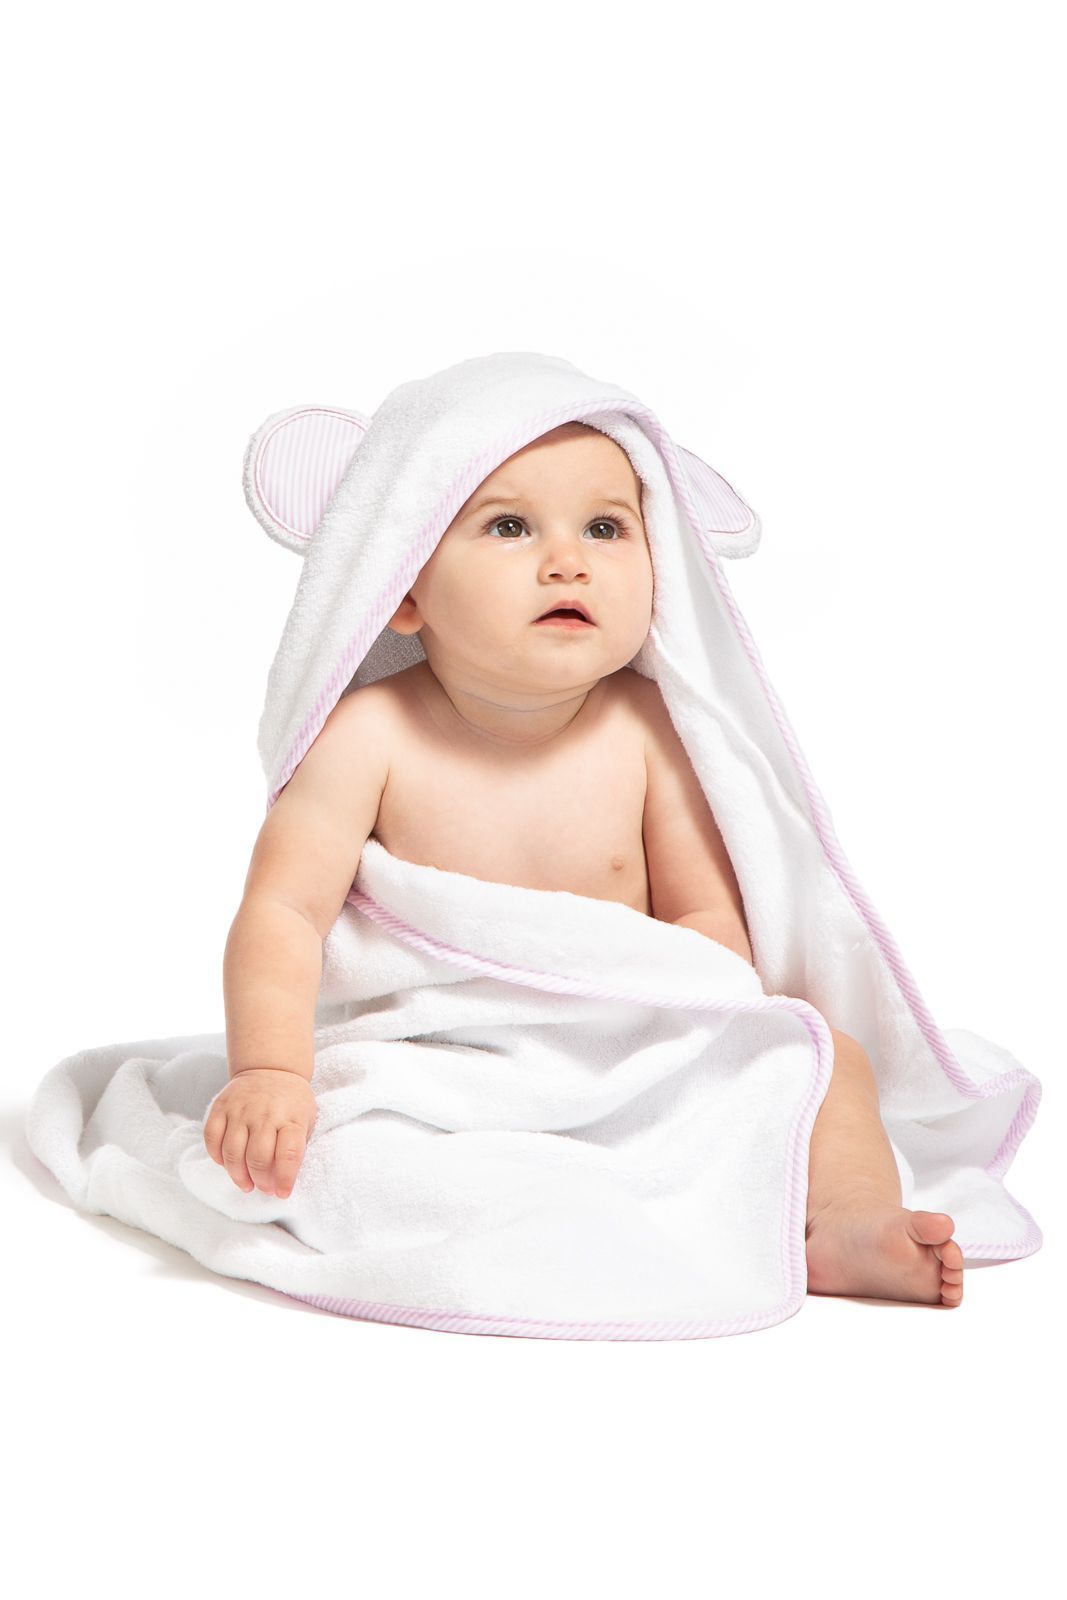 Bamboo Baby Towel - XL Hooded Baby Bath Towel - Complete Set with Bath Mitt  - Works Great as Newborn Towels or Infant - Perfect Baby Registry & Gift